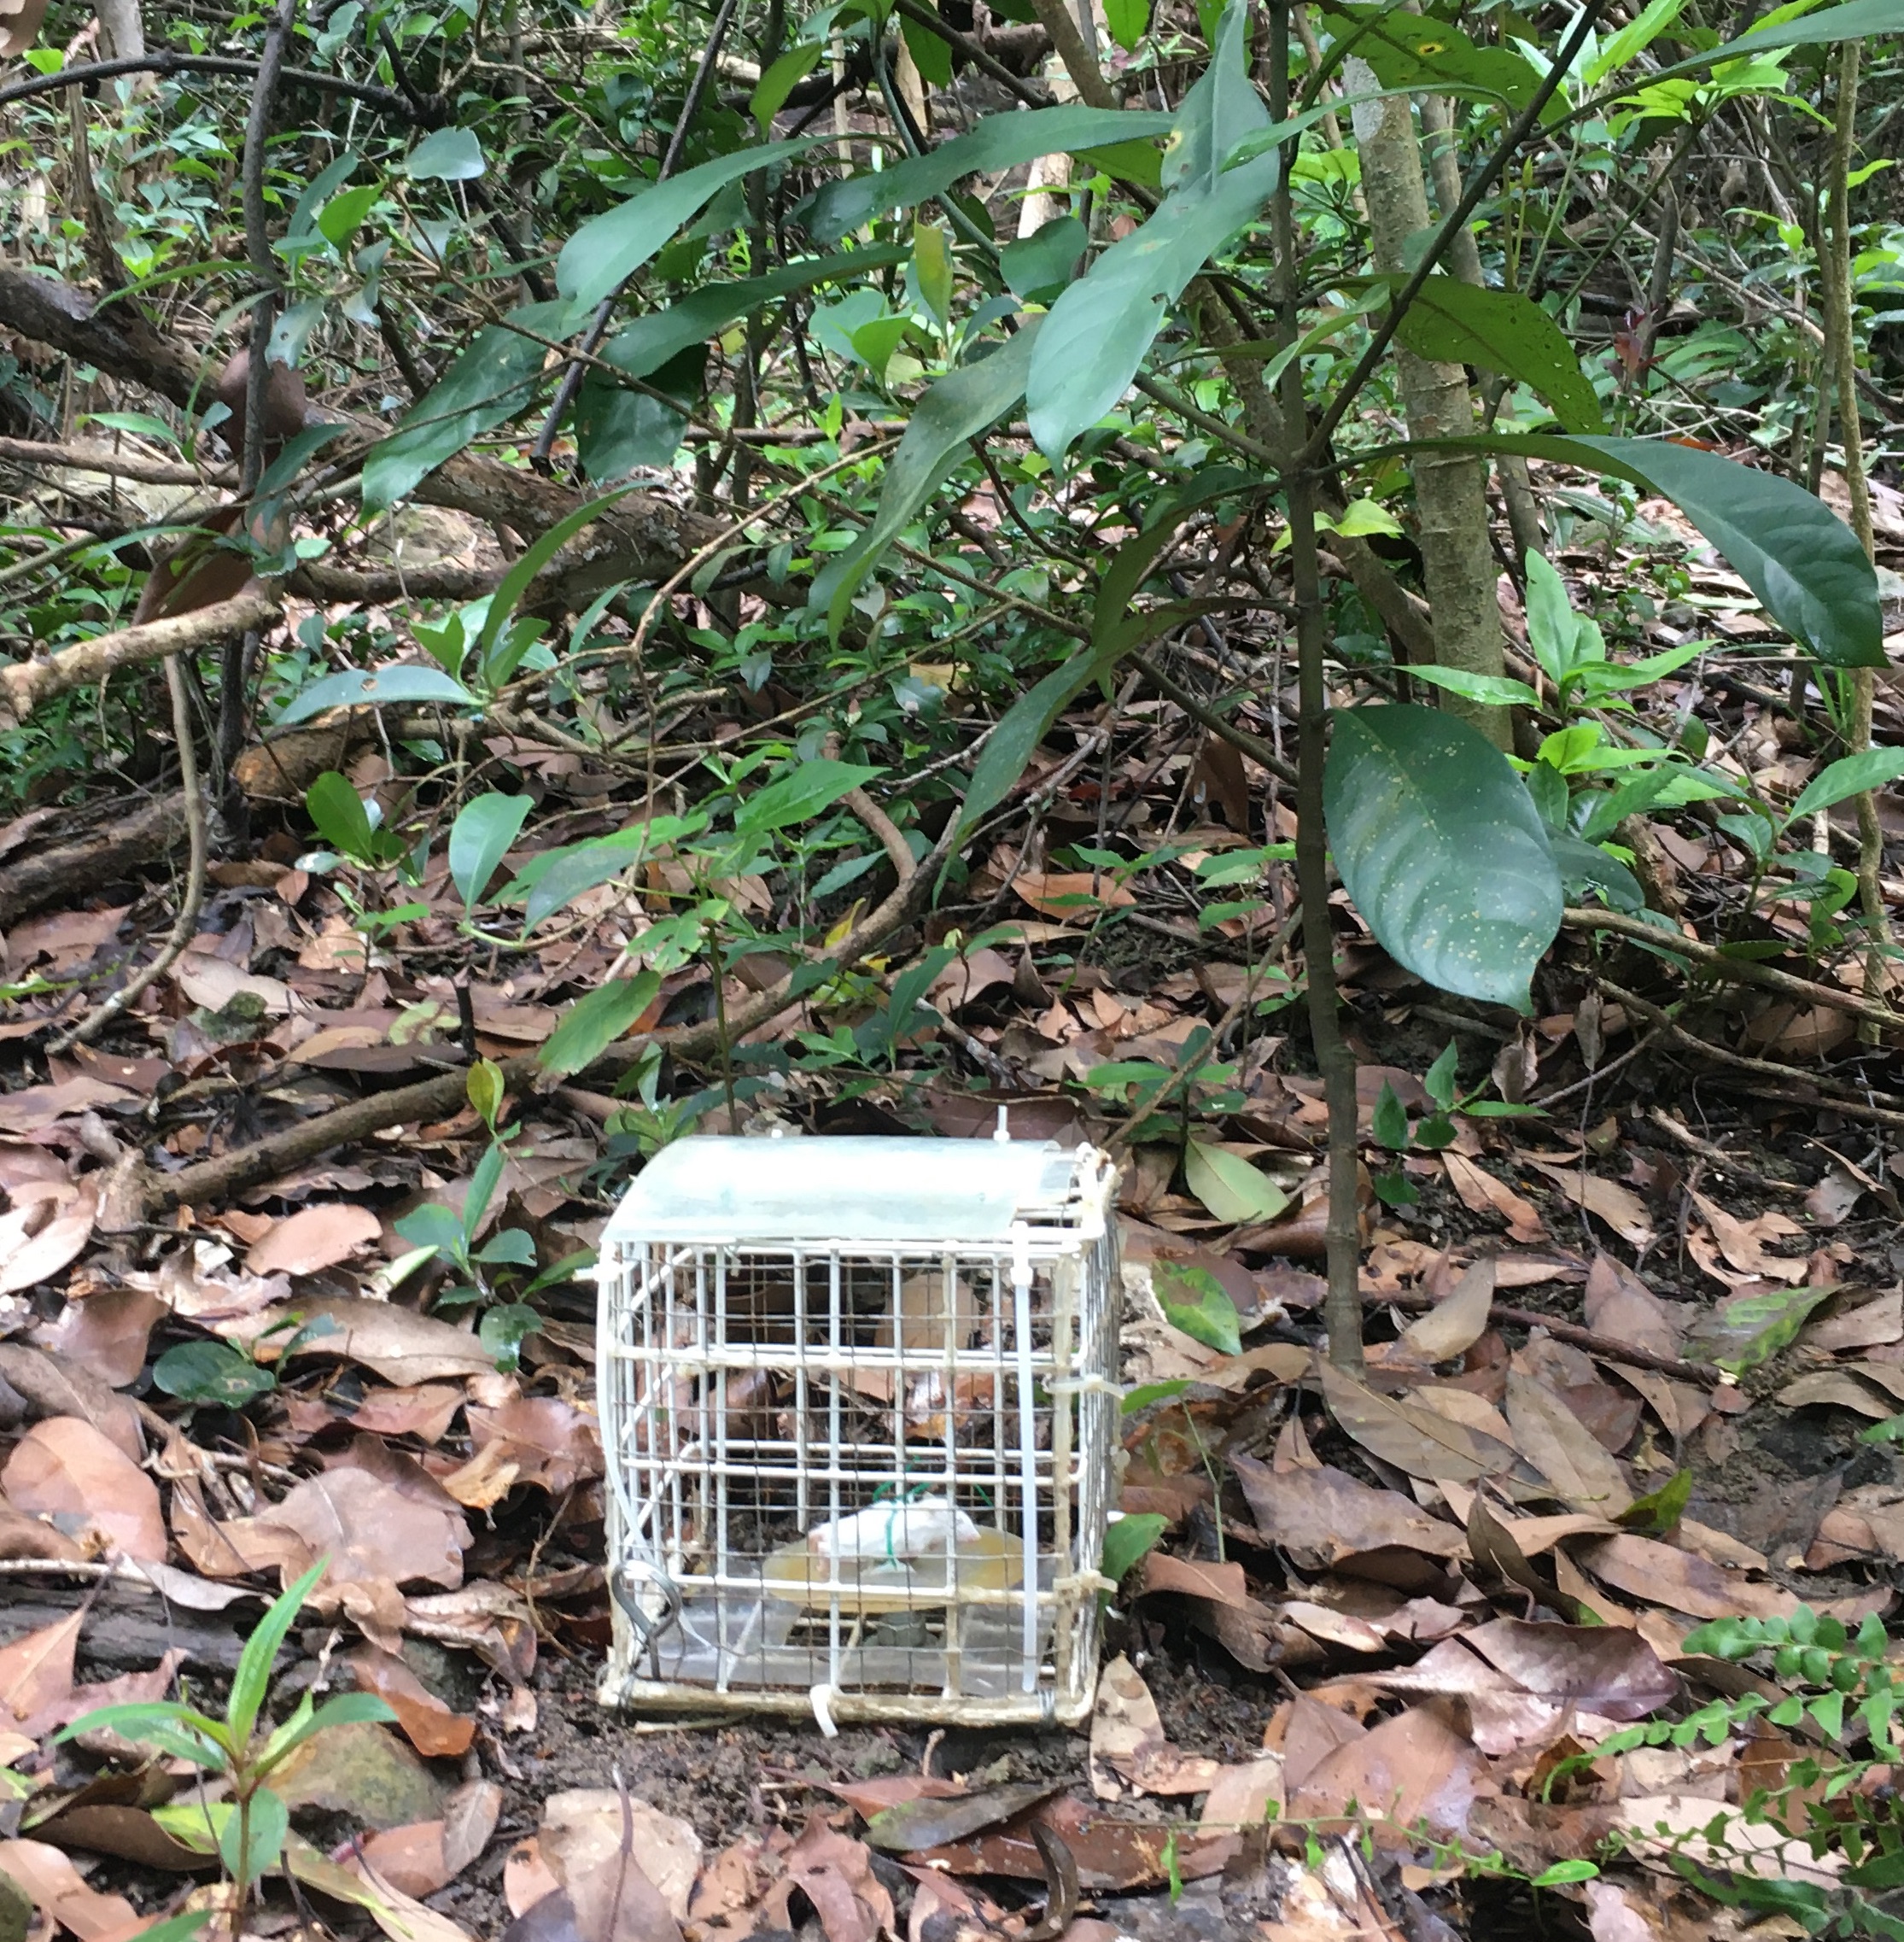 Mouse in a cage: Experimental design to filter arthropod access to small carrion on the forest floor